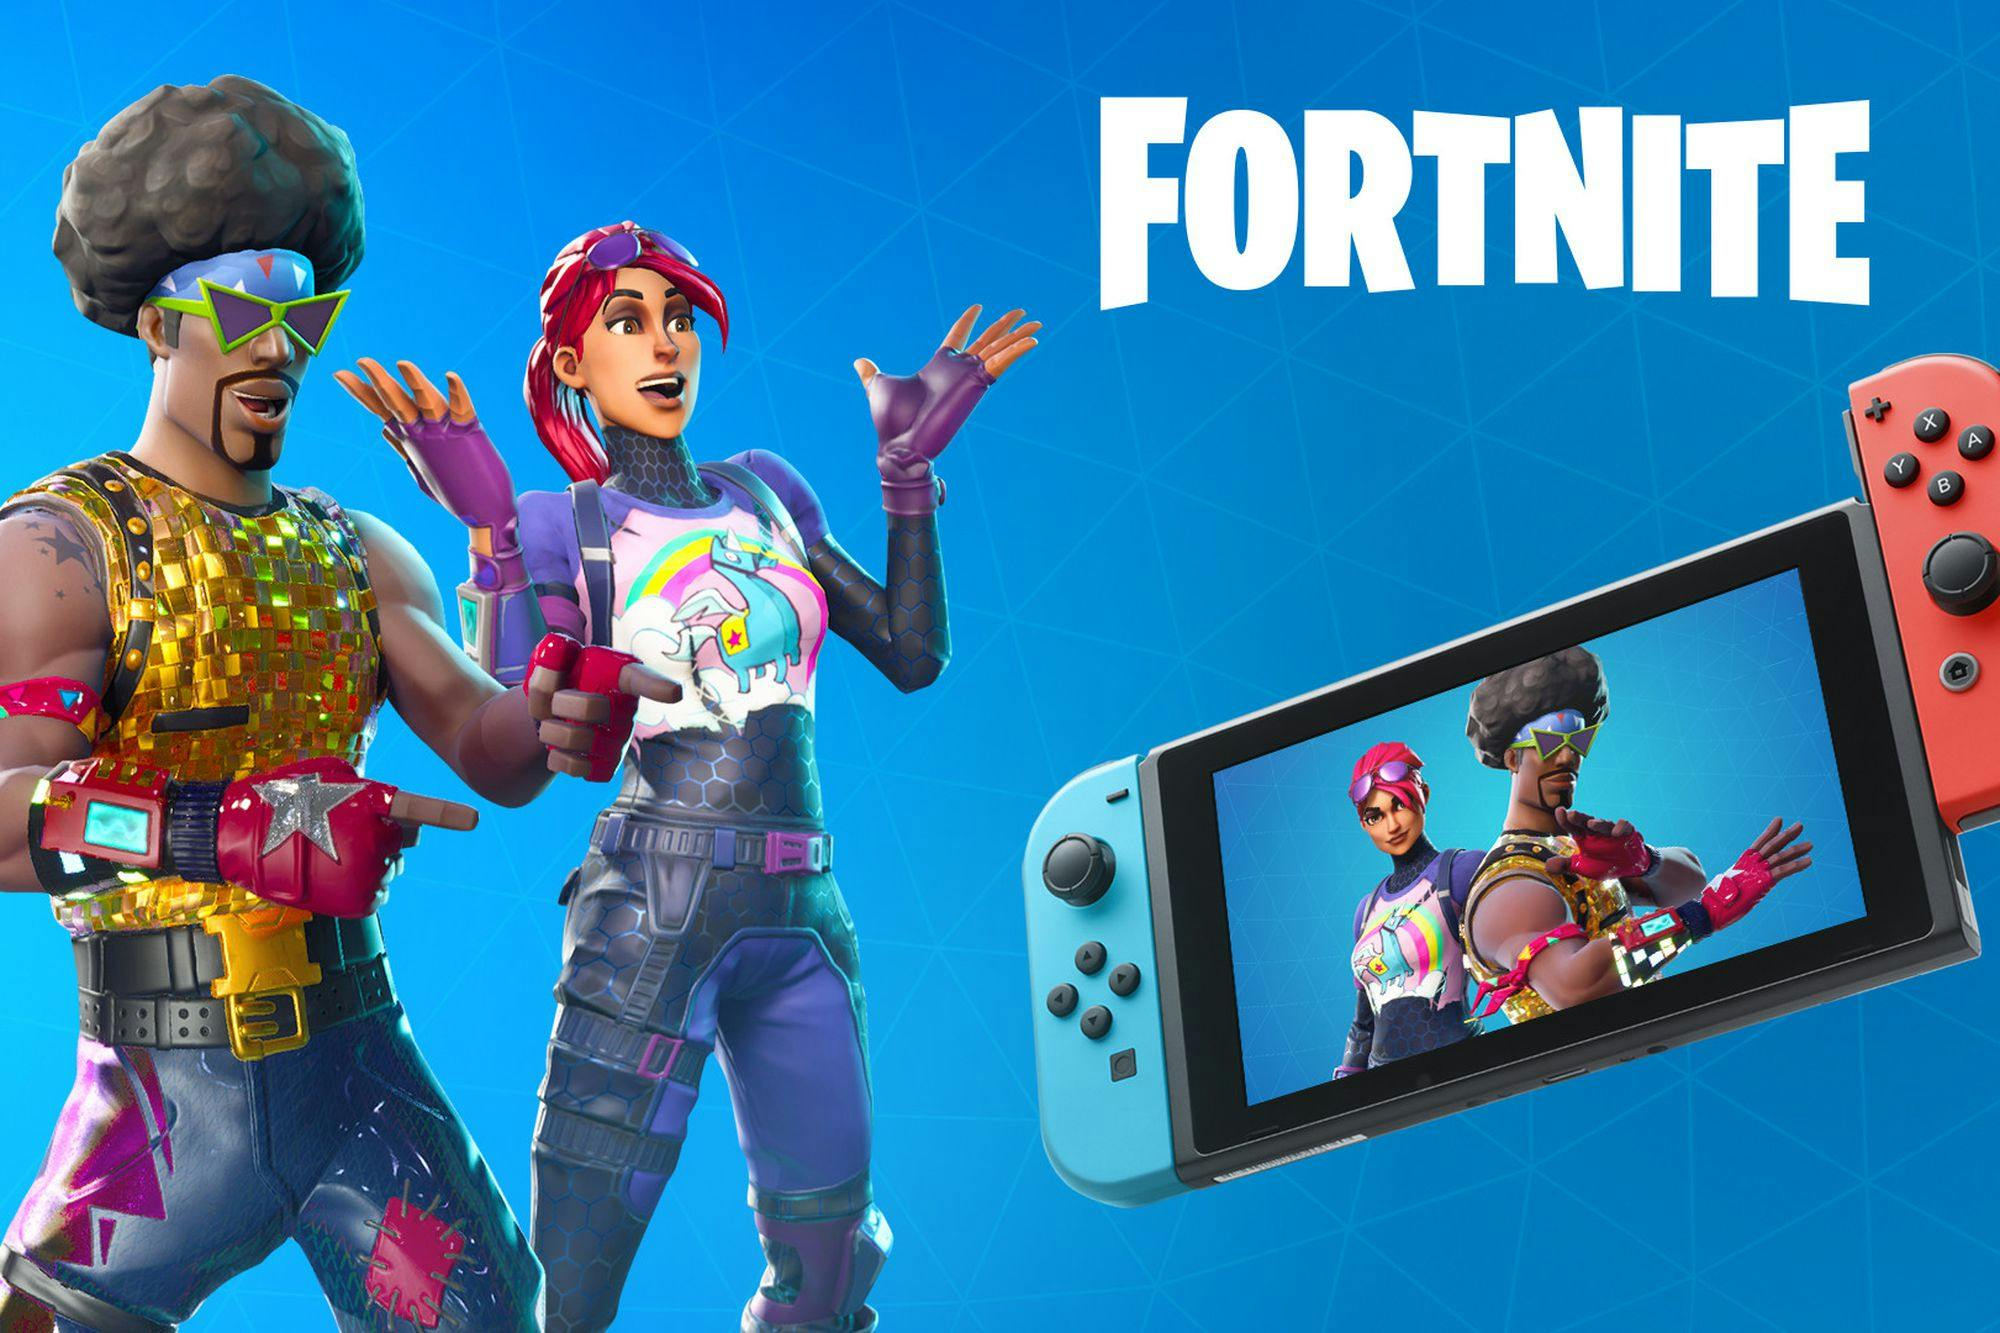 Fortnite cross-platform play with Nintendo Switch, Xbox, PlayStation and PC.